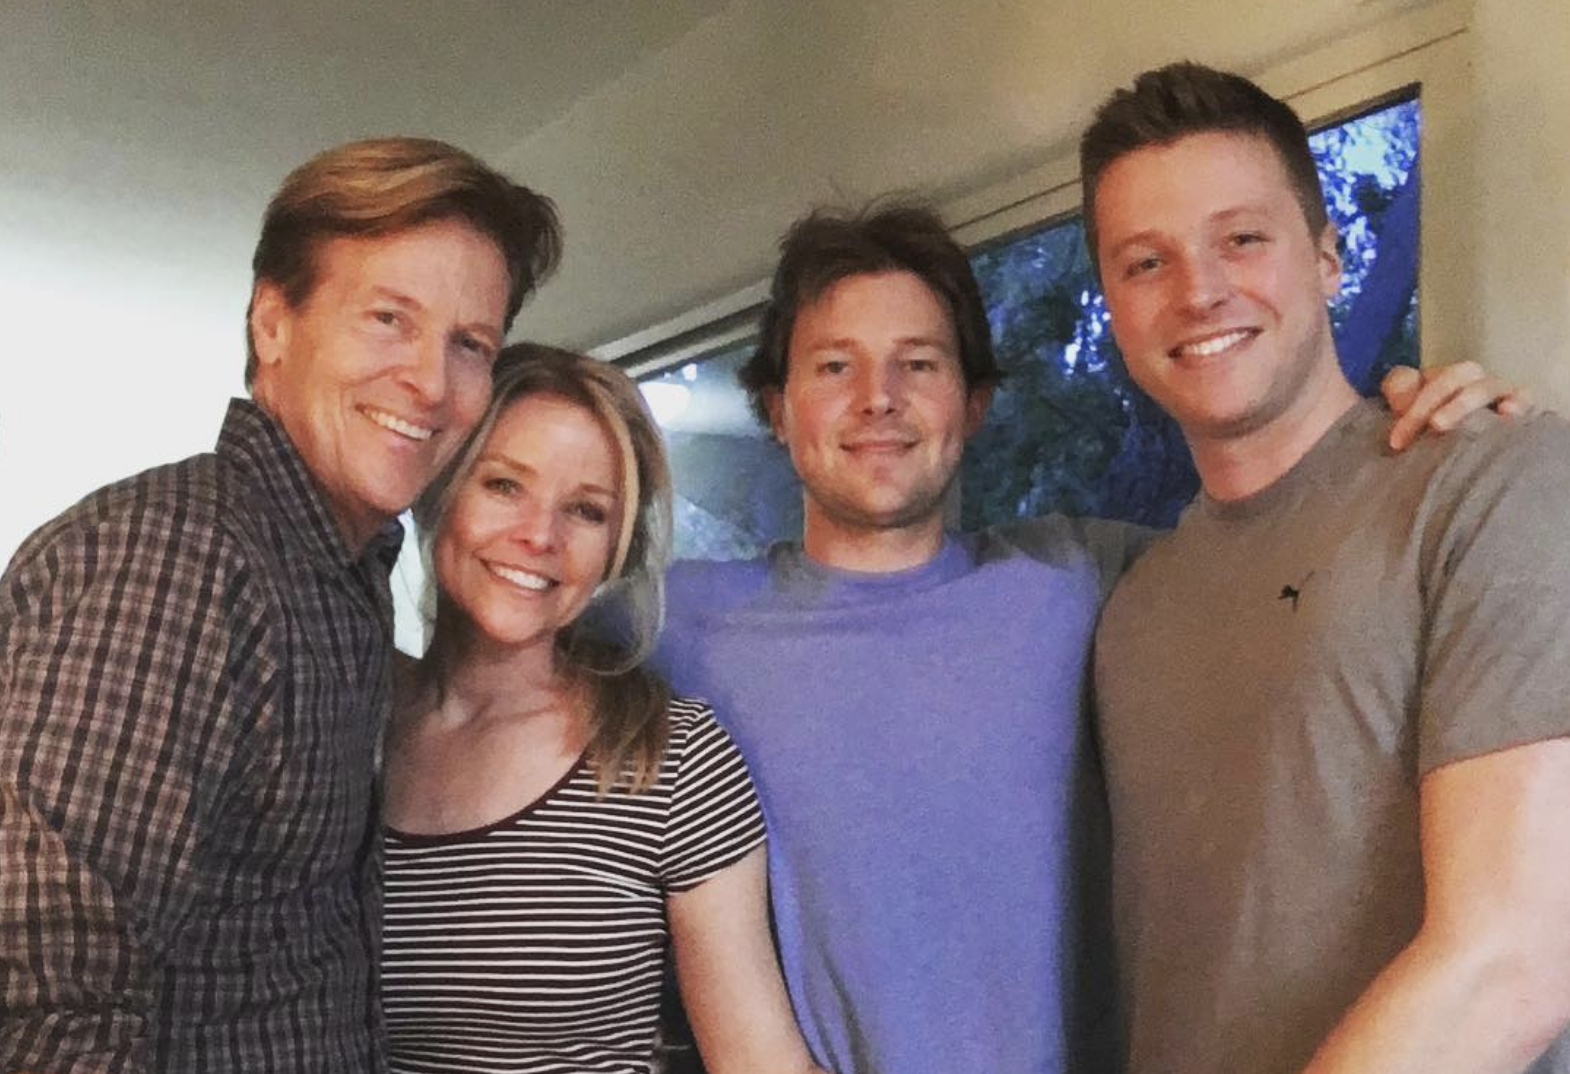 <p><span>Harrison Wagner -- the youngest son of "General Hospital" stars Jack Wagner and Kristina Wagner -- was found dead at 27 in a Los Angeles-area parking lot on June 6, 2022. Days later, the Wagners announced that their son "ultimately lost his battle with addiction" and that they'd started a </span><a href="https://newlifehouse.com/harrison-wagner-scholarship-fund/">scholarship in his name</a><span> they hope "will help other young men get help for their addiction that would not otherwise be able to afford it," explaining that all funds donated will help young men -- who could not otherwise afford care at the New Life House, a recovery community -- to pay rent there. </span></p><p>Though Jack and Kristina -- who played beloved couple Frisco and Felicia on the soap opera for years -- split in the mid-2000s, they remained close to each other and to their sons, Harrison (right) and Peter. In 2016, Jack asked the public for help when Harrison -- who, according to <a href="https://www.soapsindepth.com/posts/general-hospital/jack-and-kristina-wagners-son-harrison-dead-at-27">Soaps In Depth</a>, has worked as an actor, DJ and music producer -- relapsed and went missing for several days. "Harrison has struggled with drugs and alcohol just as I did when I was younger," Jack tweeted at the time. </p>